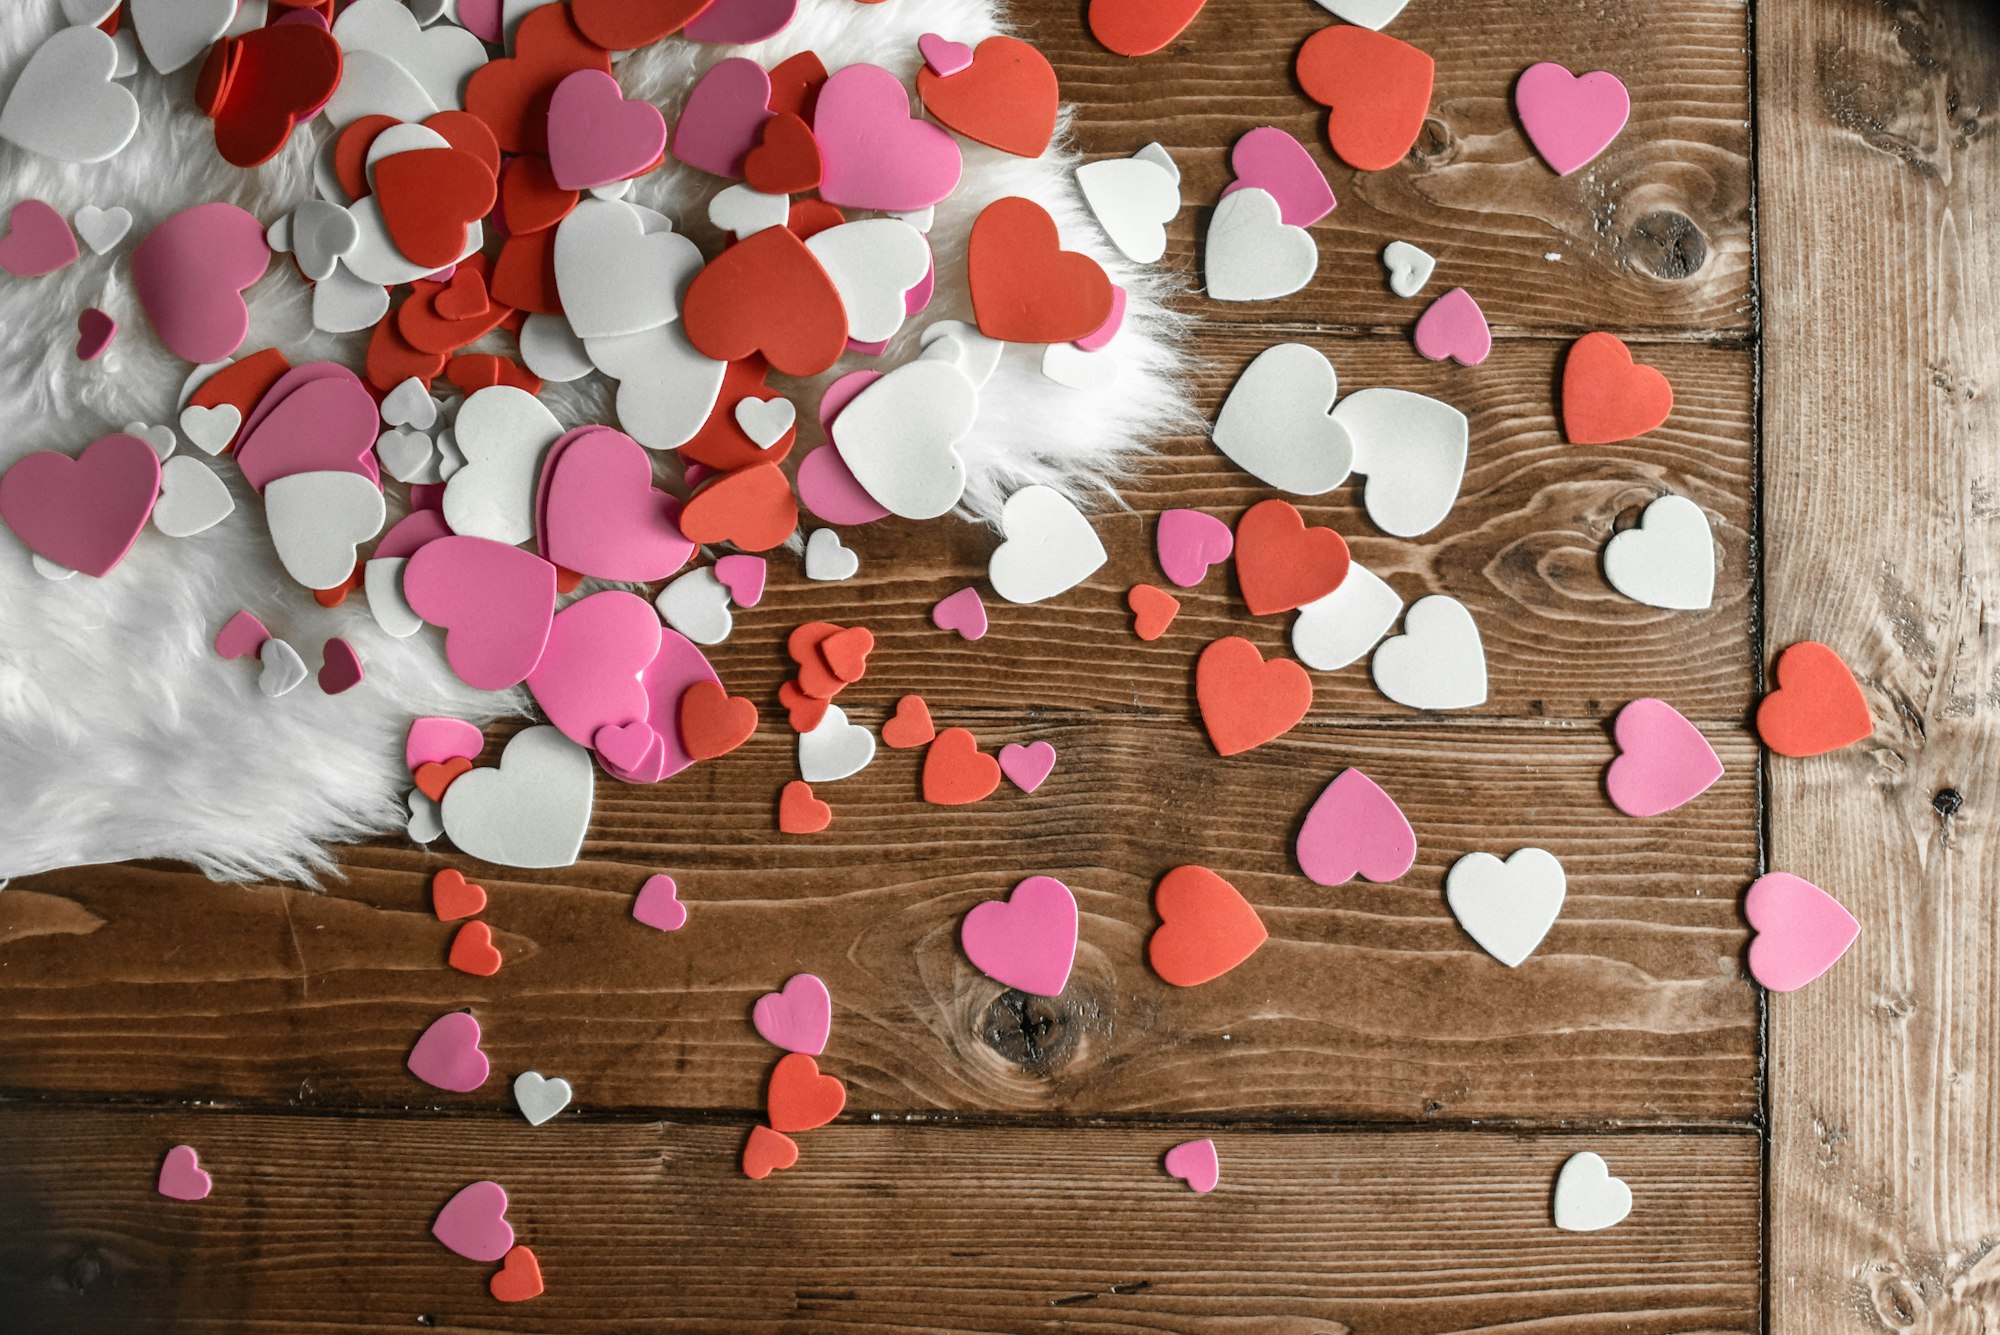 Use Circleboom Publish for your Valentine's Day social media posts.